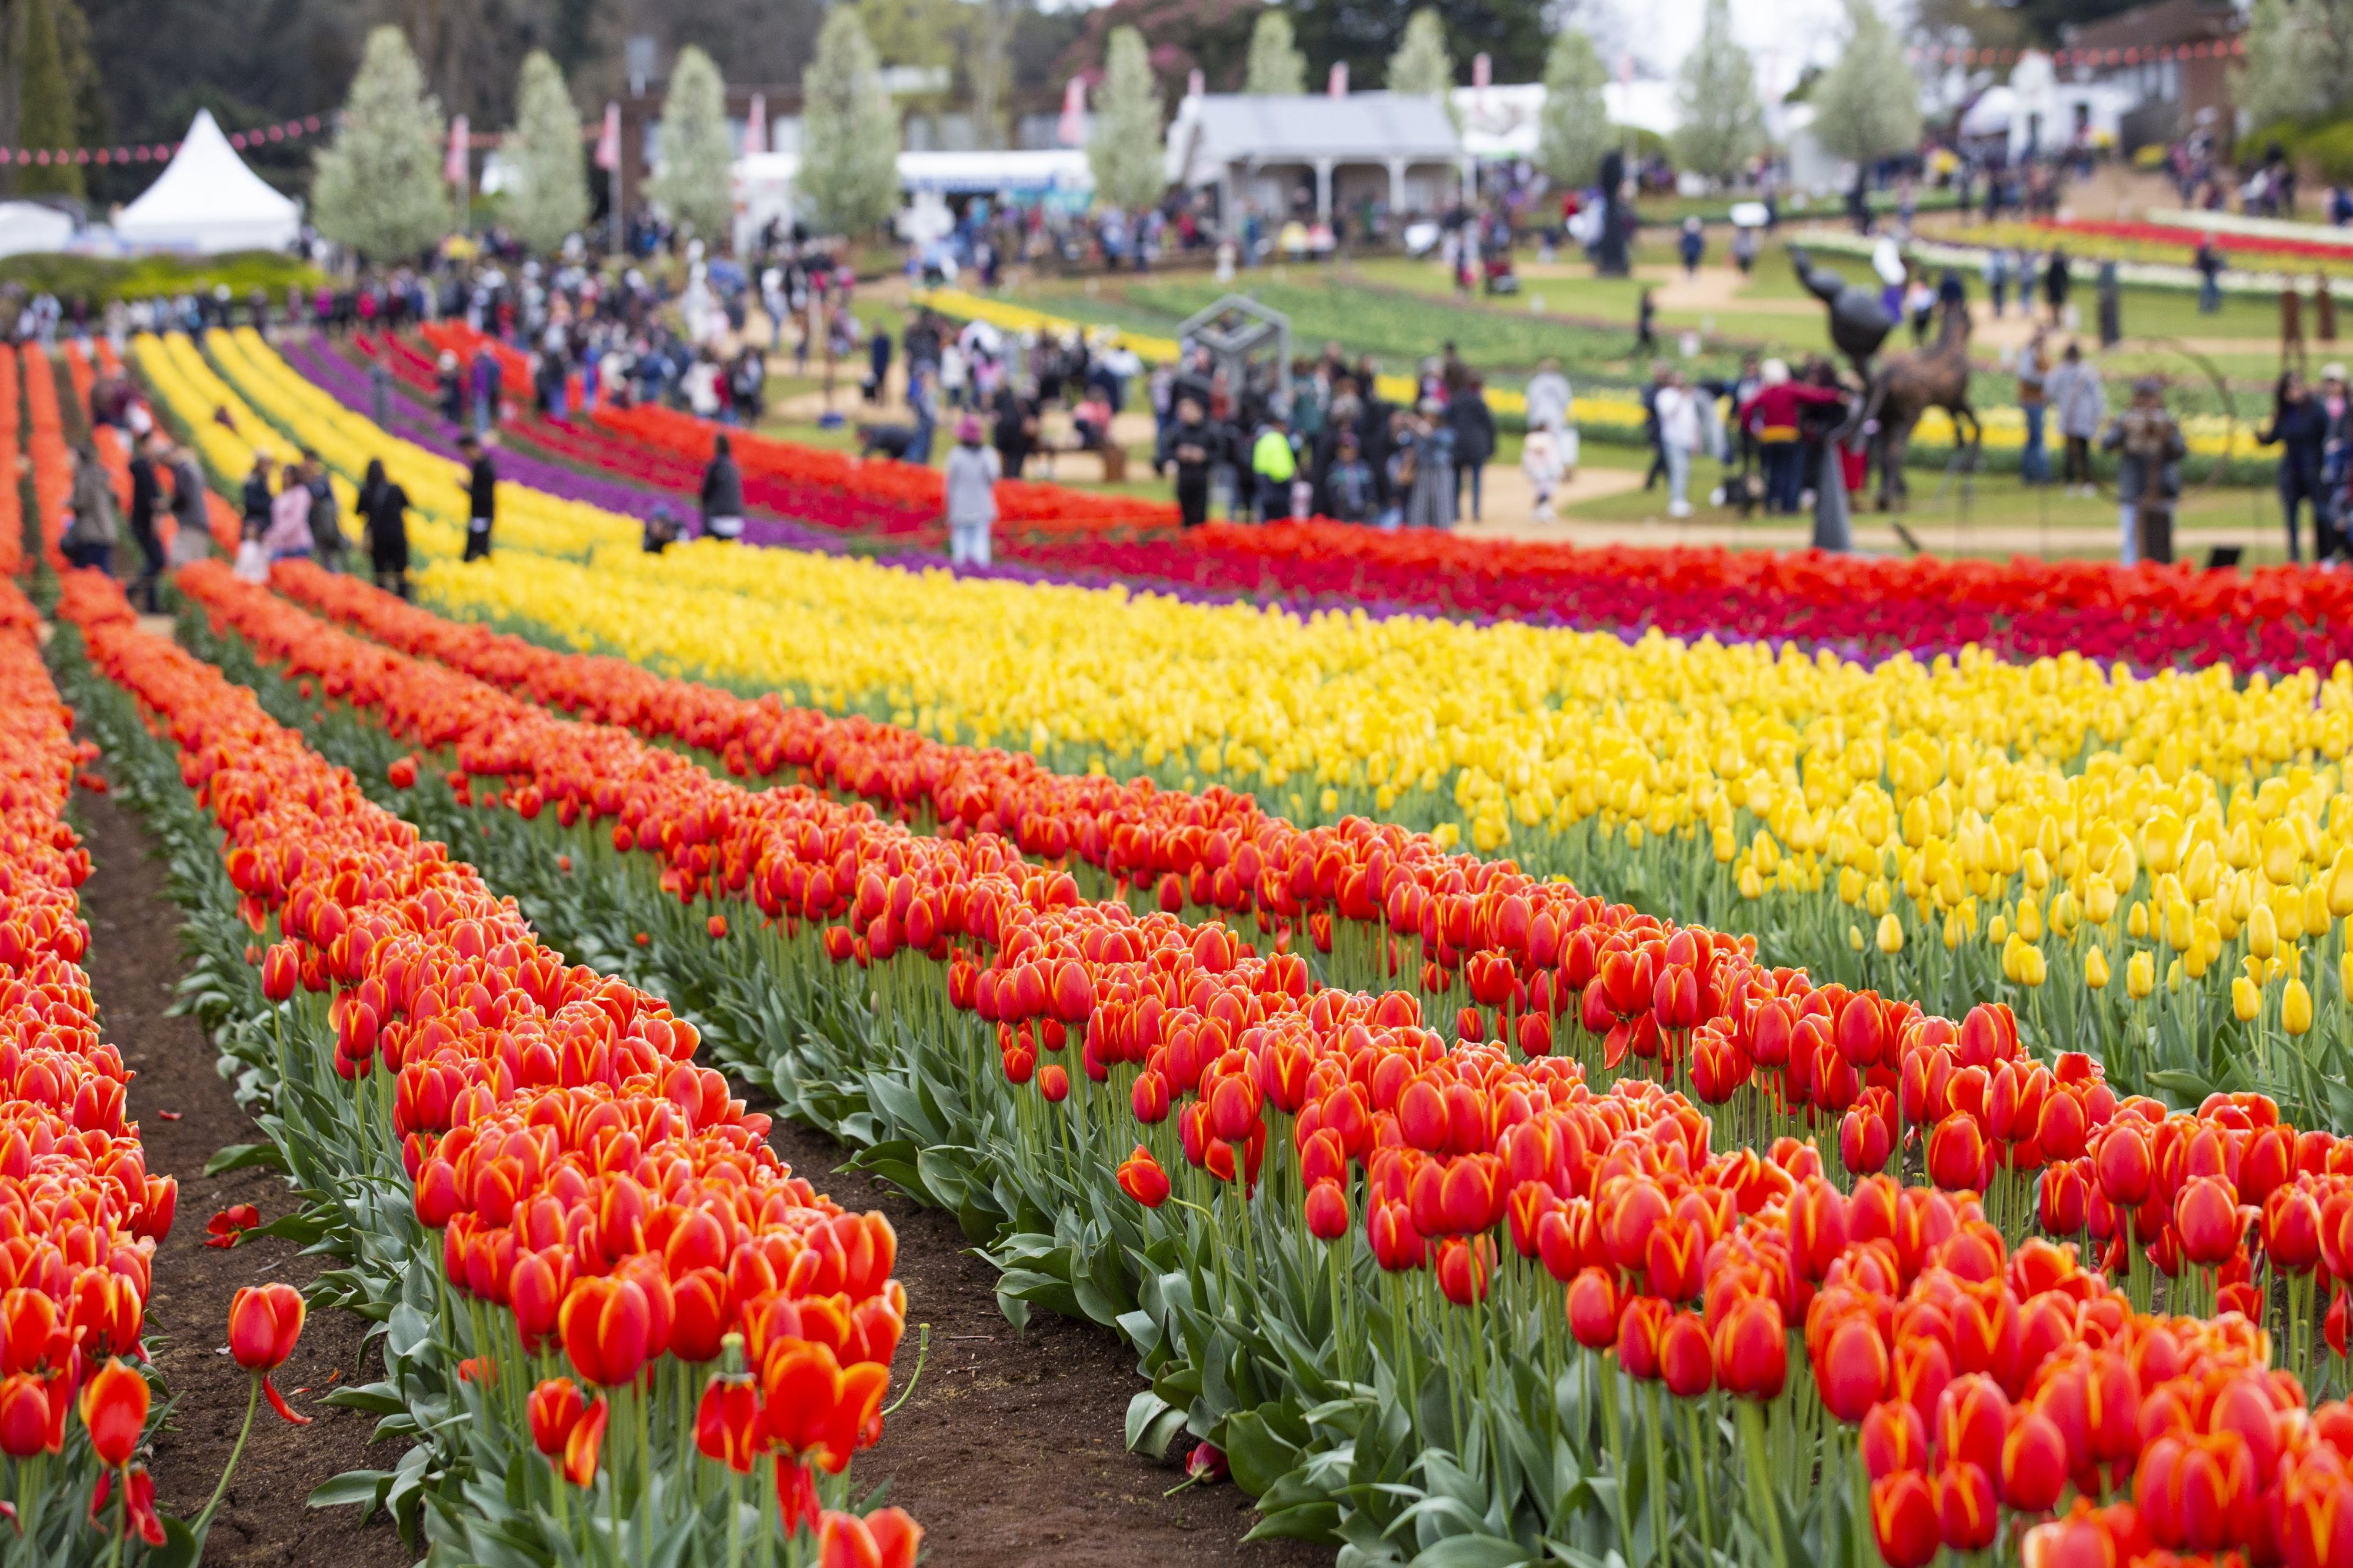 Surround yourself with 900,000 flowers at this huge tulip festival Beat Magazine